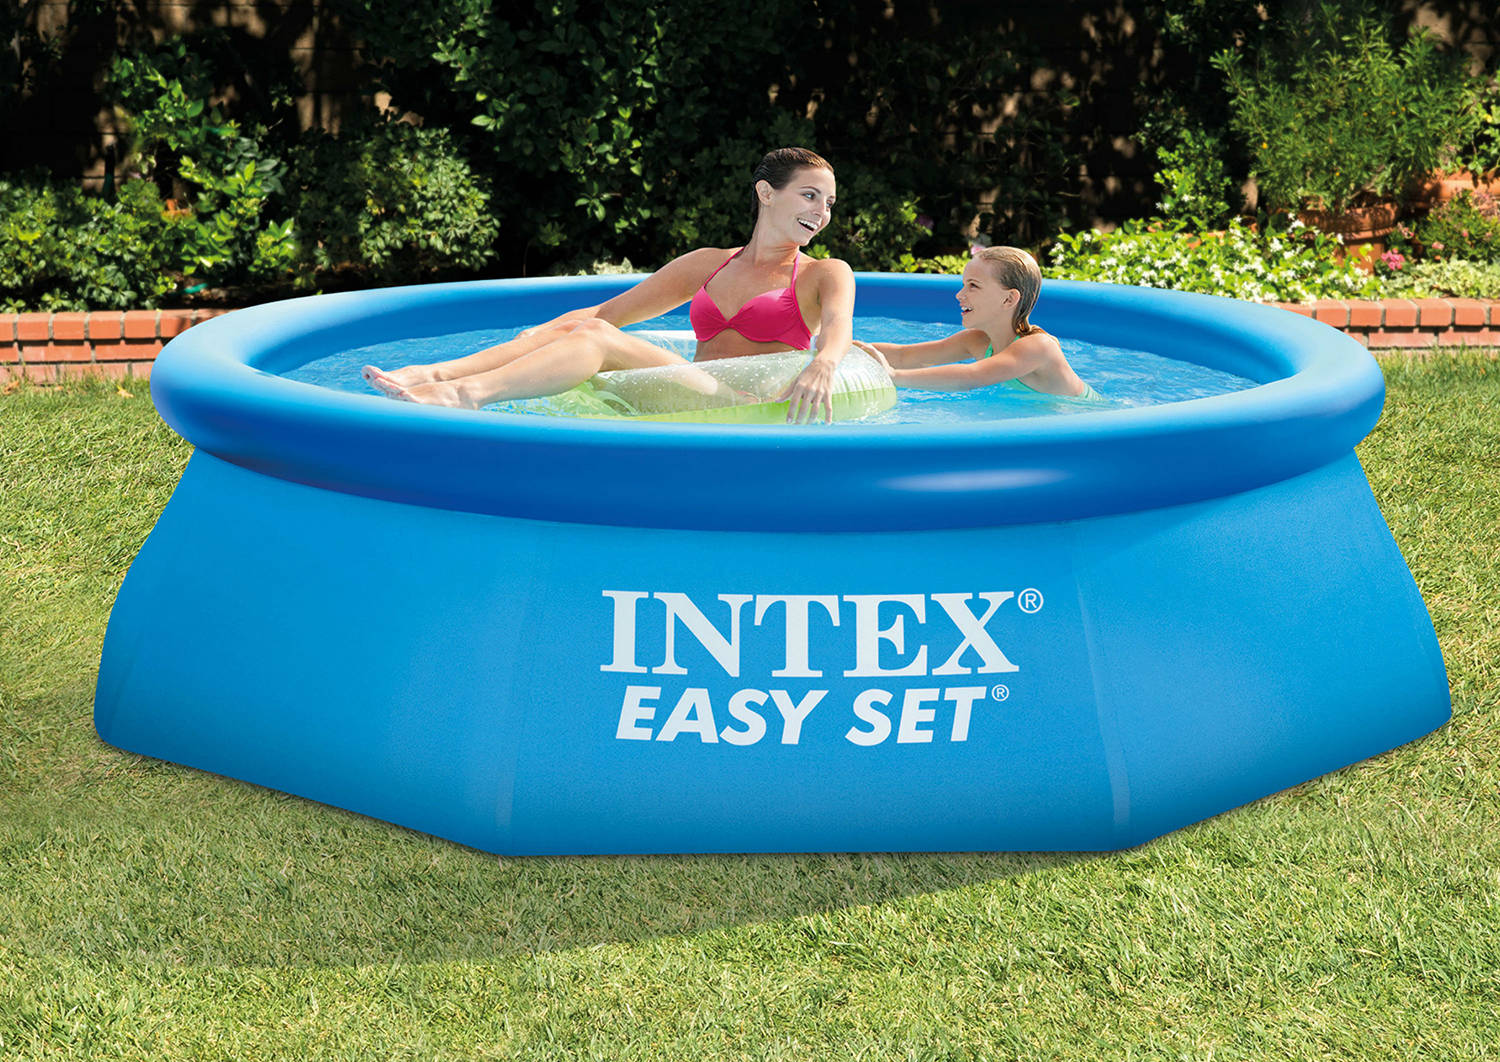 Intex 8′ x 30″ Easy Set Above Ground Swimming Pool with Filter Pump—$37.84 + Free Pickup!